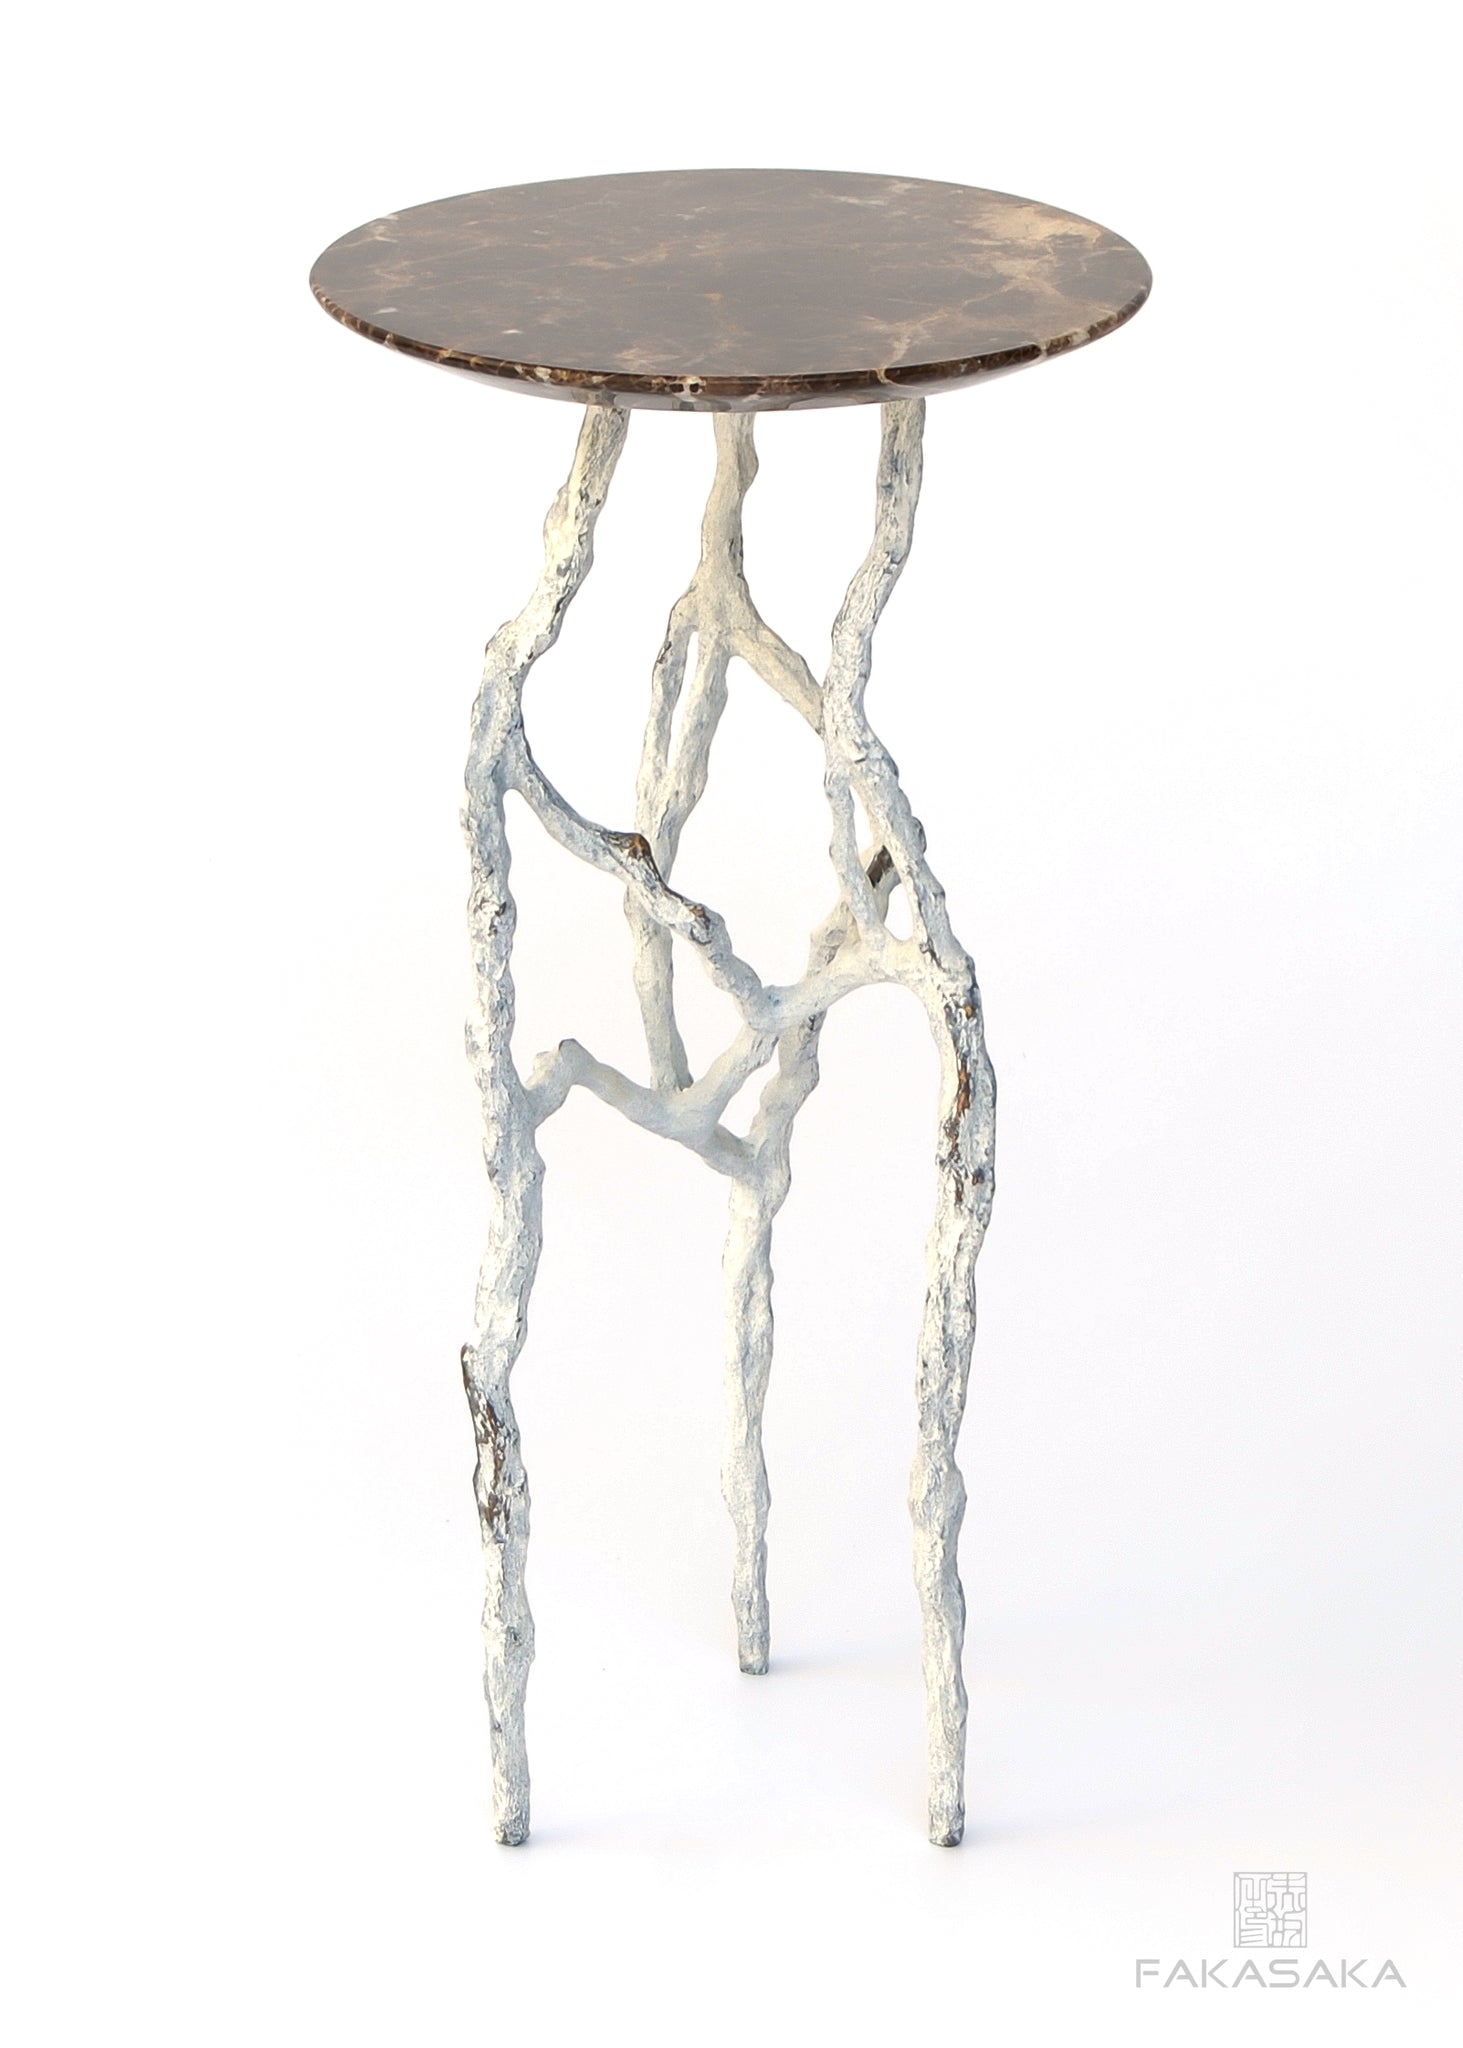 ALEXIA 3 DRINK TABLE<br><br>MARRON IMPERIAL MARBLE<br>OFF-WHITE BRONZE